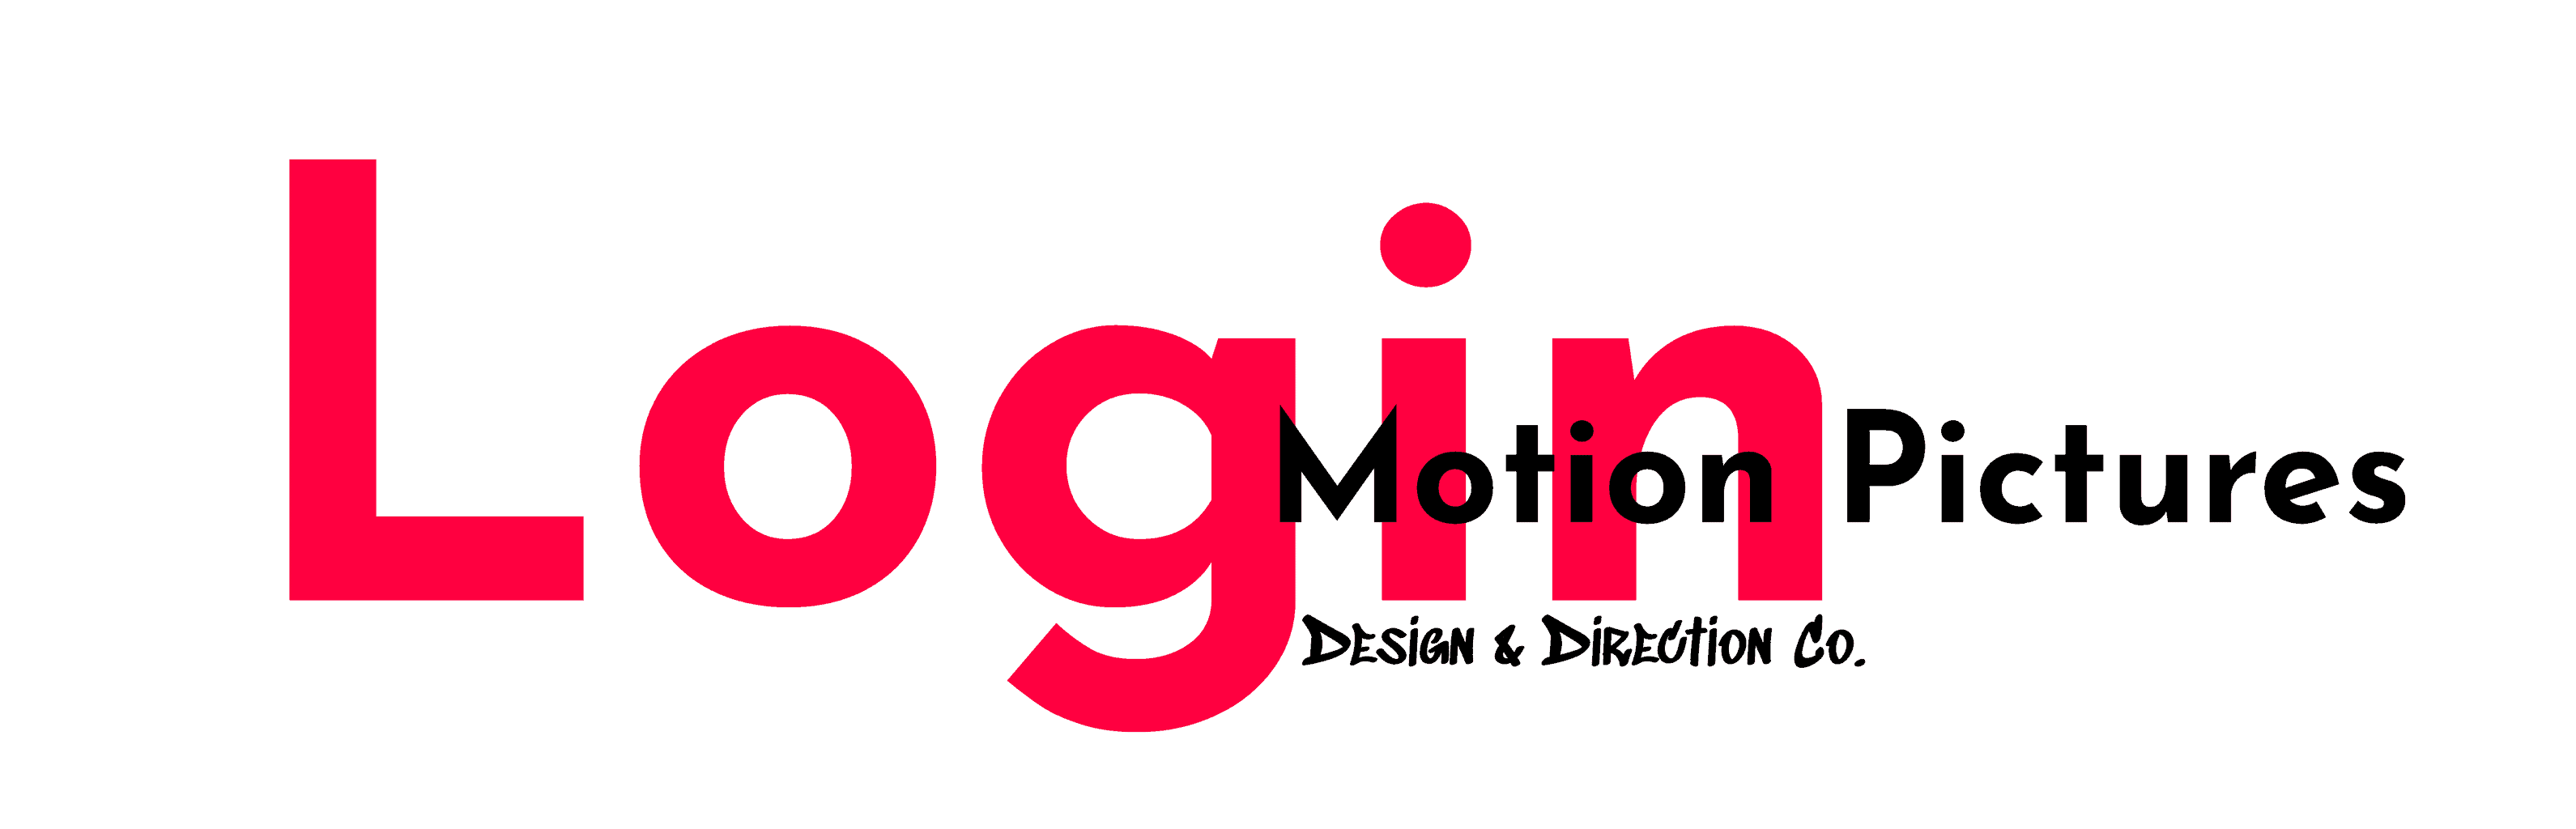 Login Motion Pictures